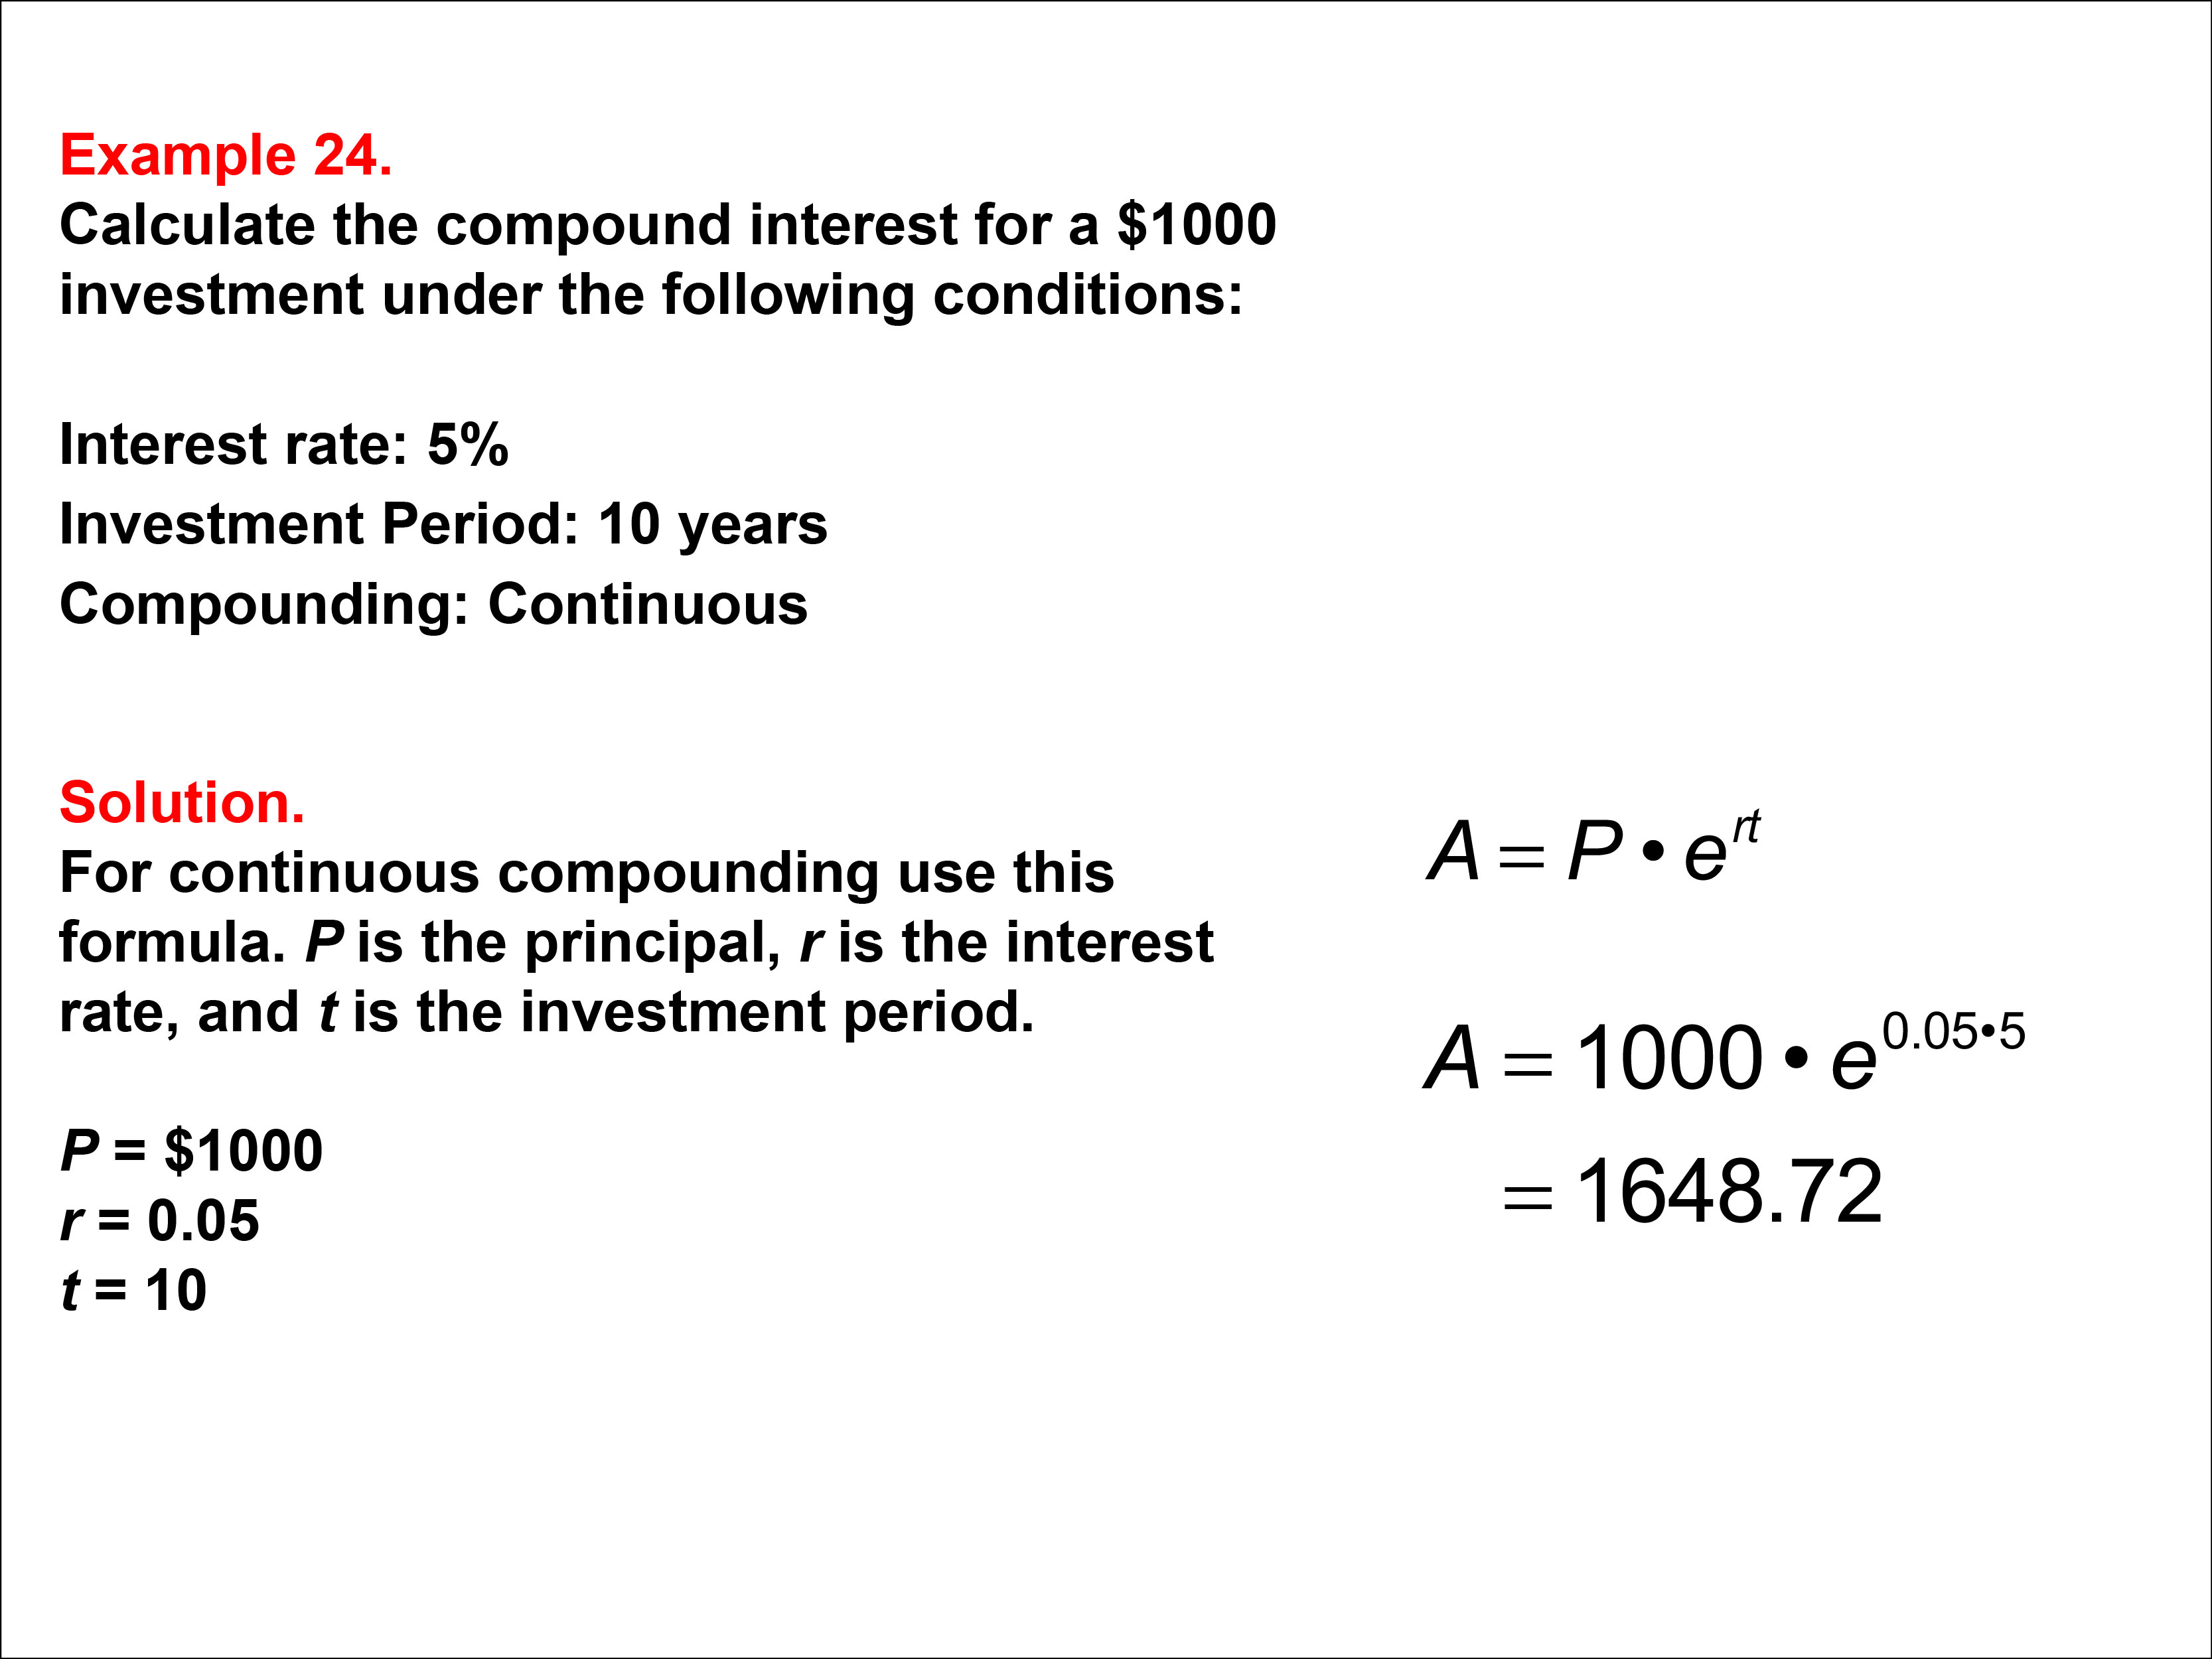 Compound Interest: Example 24. Calculate the compound interest based on continuous compounding for a ten-year investment, based on an interest of 5%.